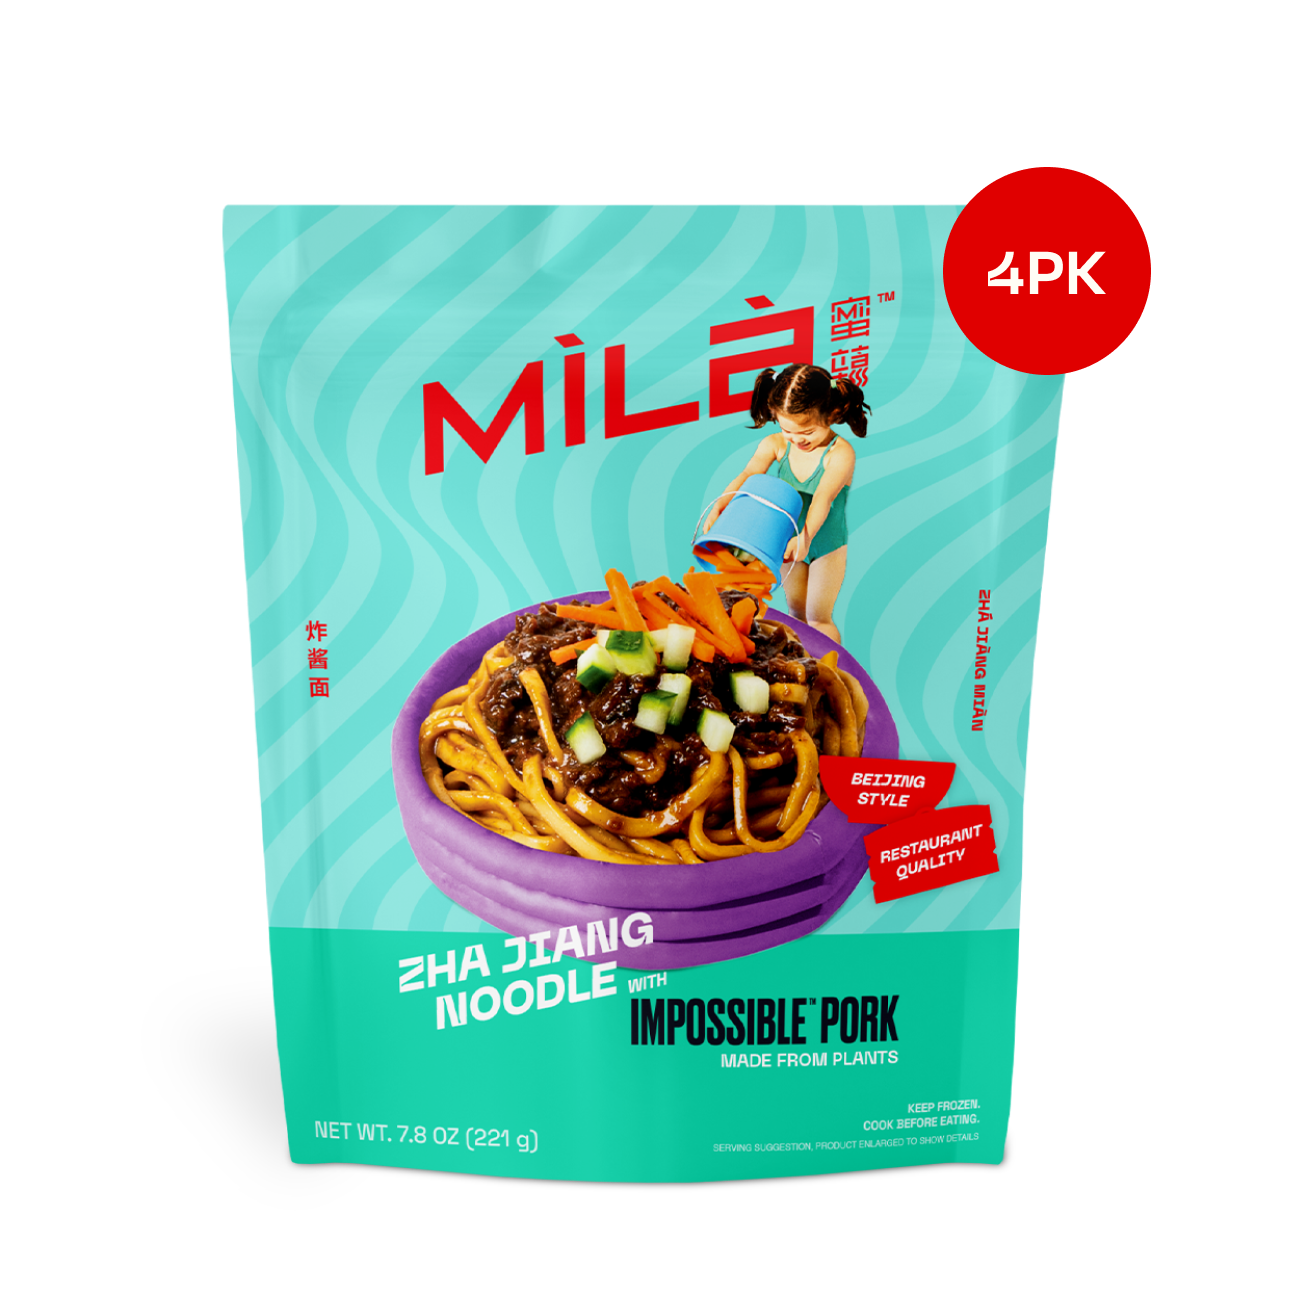 Beijing Zha Jiang Noodle / Impossible™ Meat Made From Plants